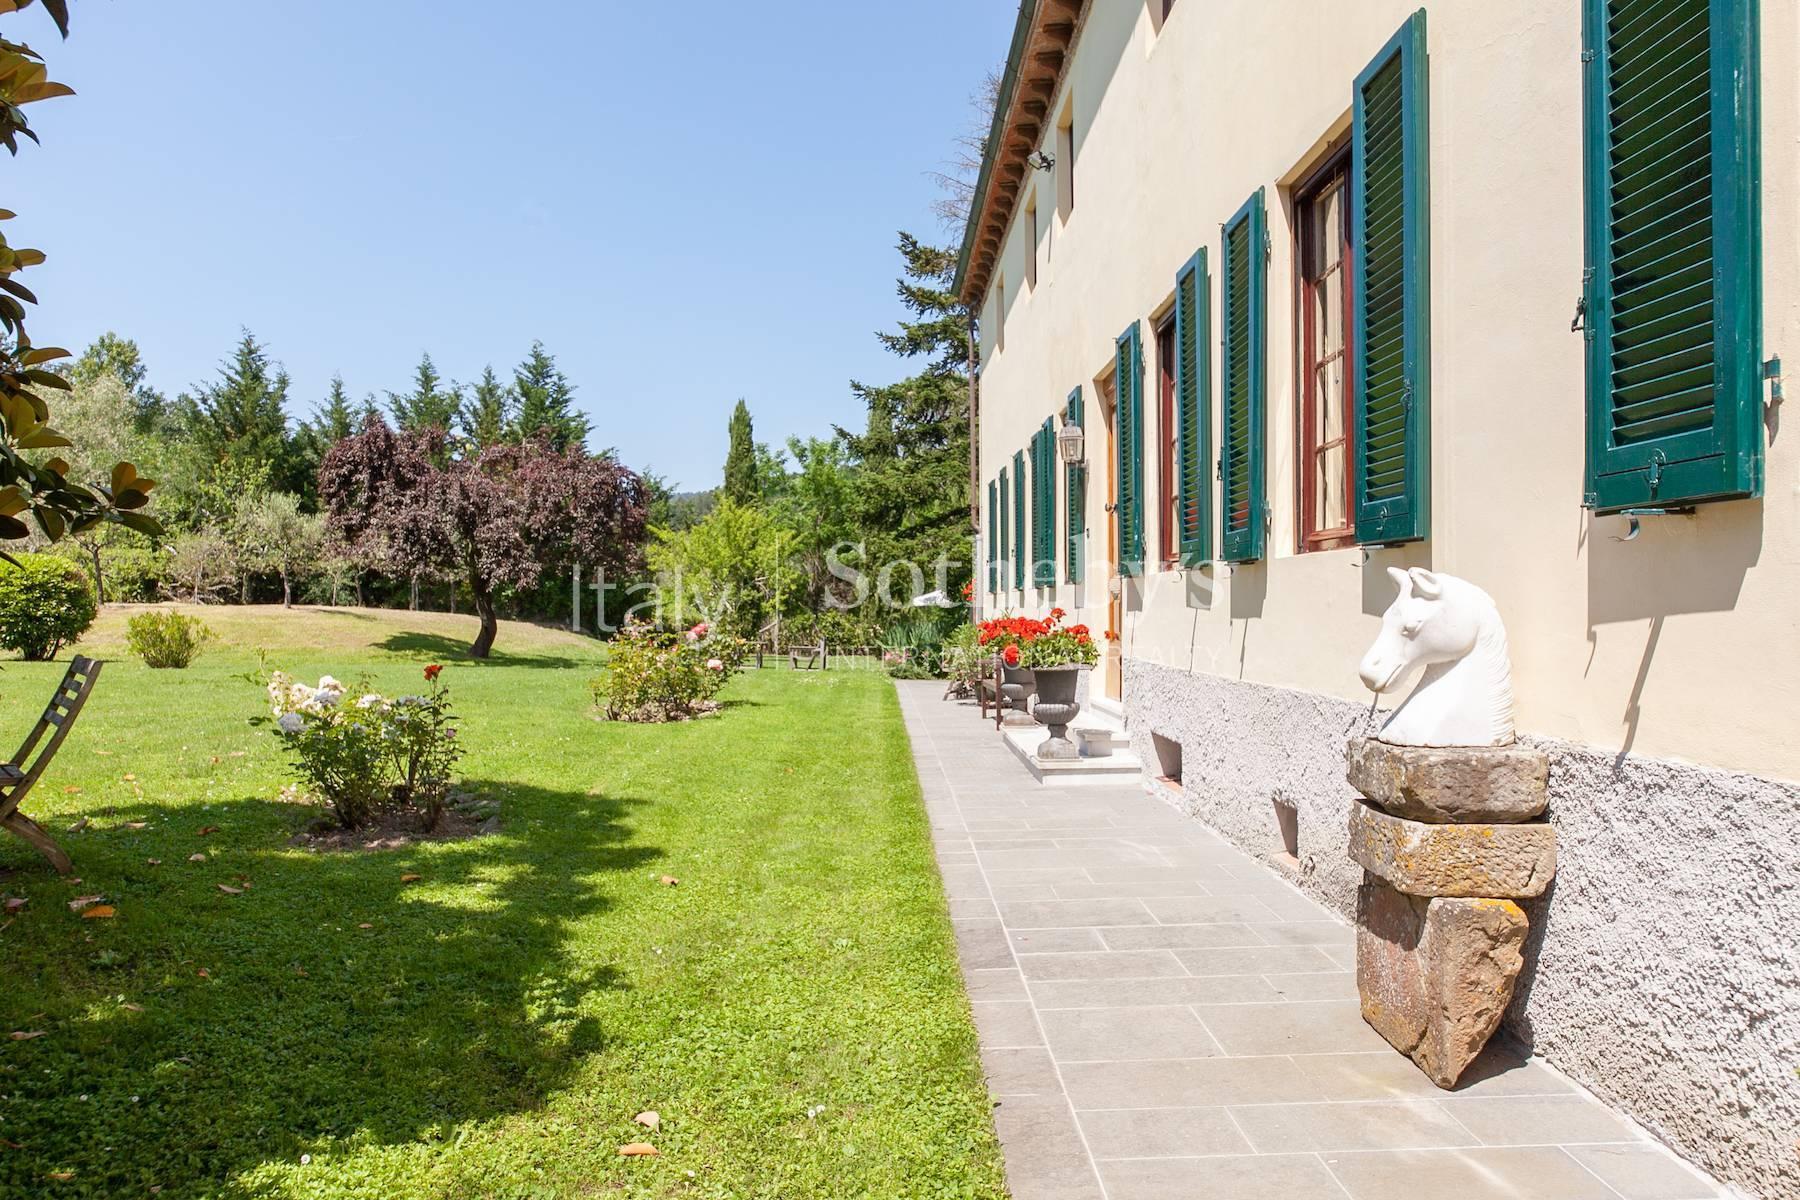 Ancient Villa from the 1700s in Lucca - 3